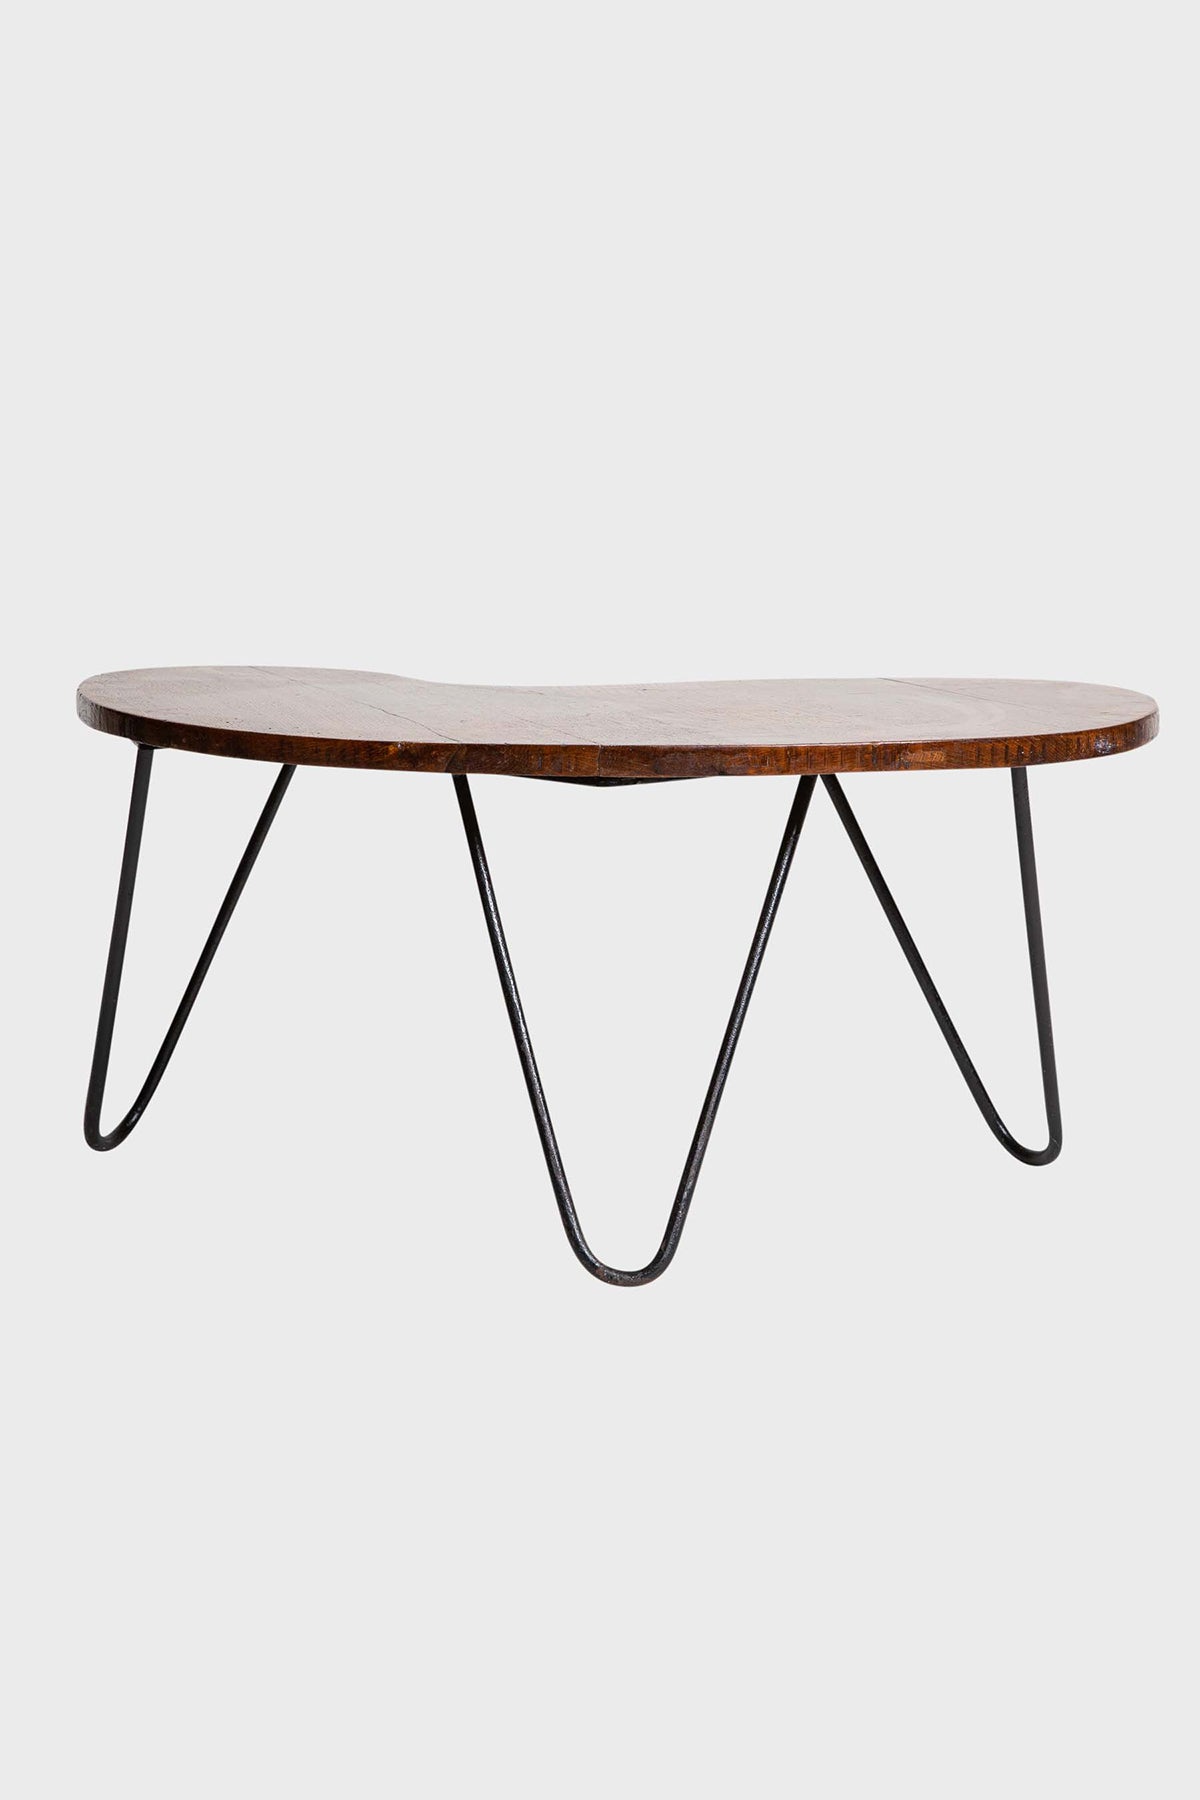 MAXFIELD PRIVATE COLLECTION | 1950'S JACQUES HITIER LOW TABLE